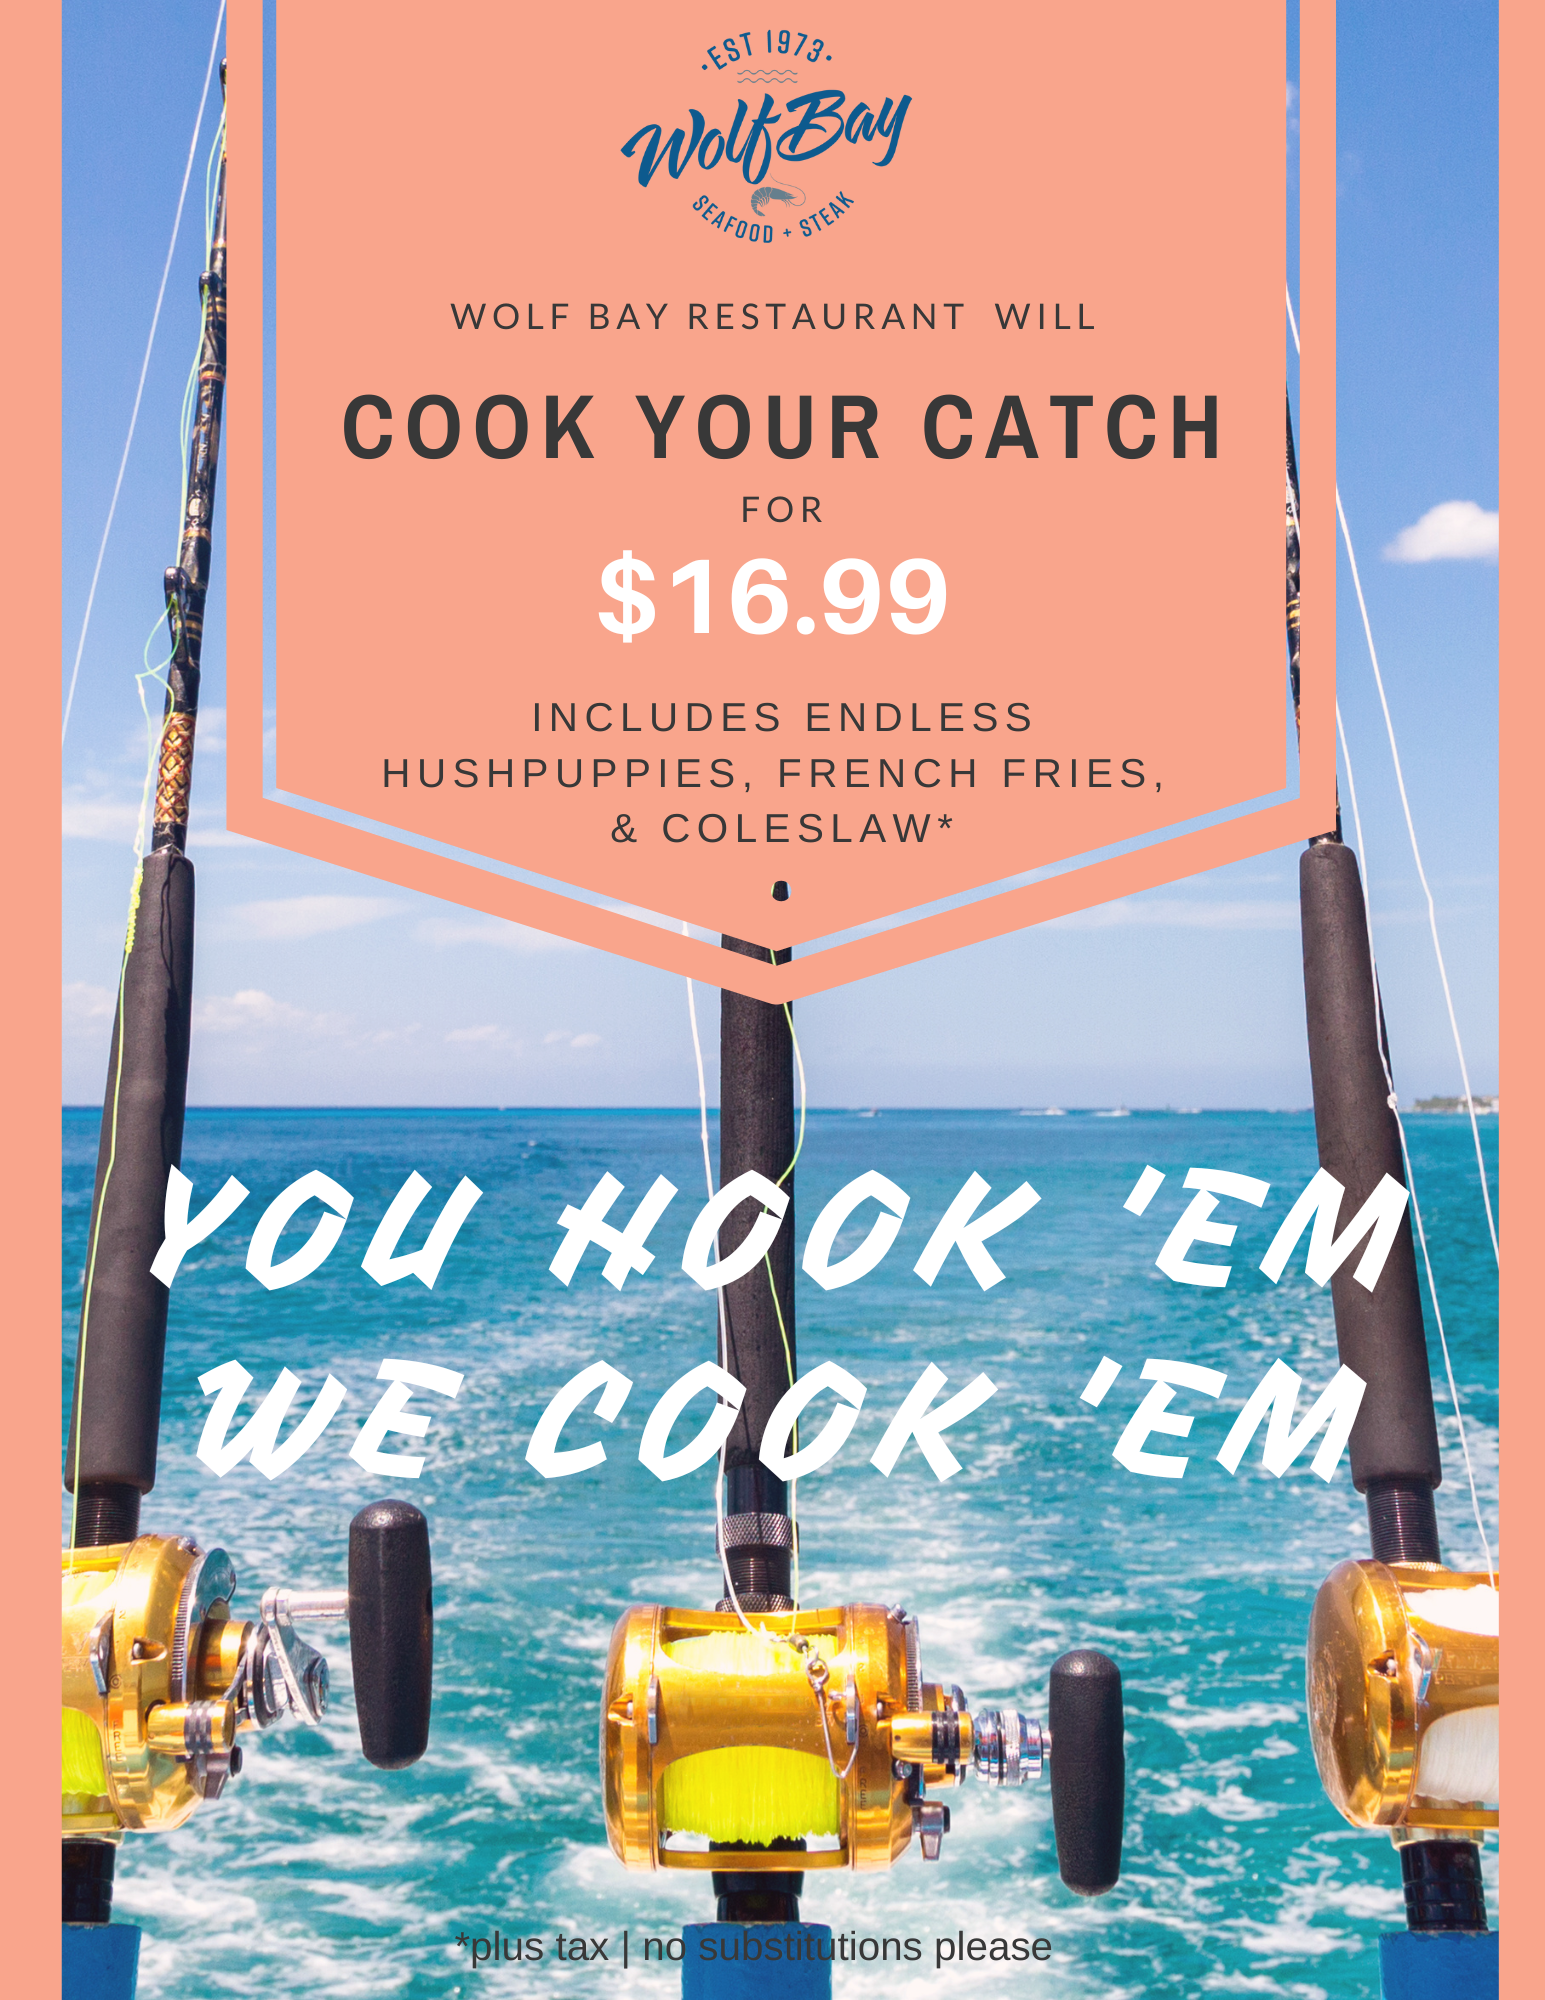 We Will Cook Your Catch!